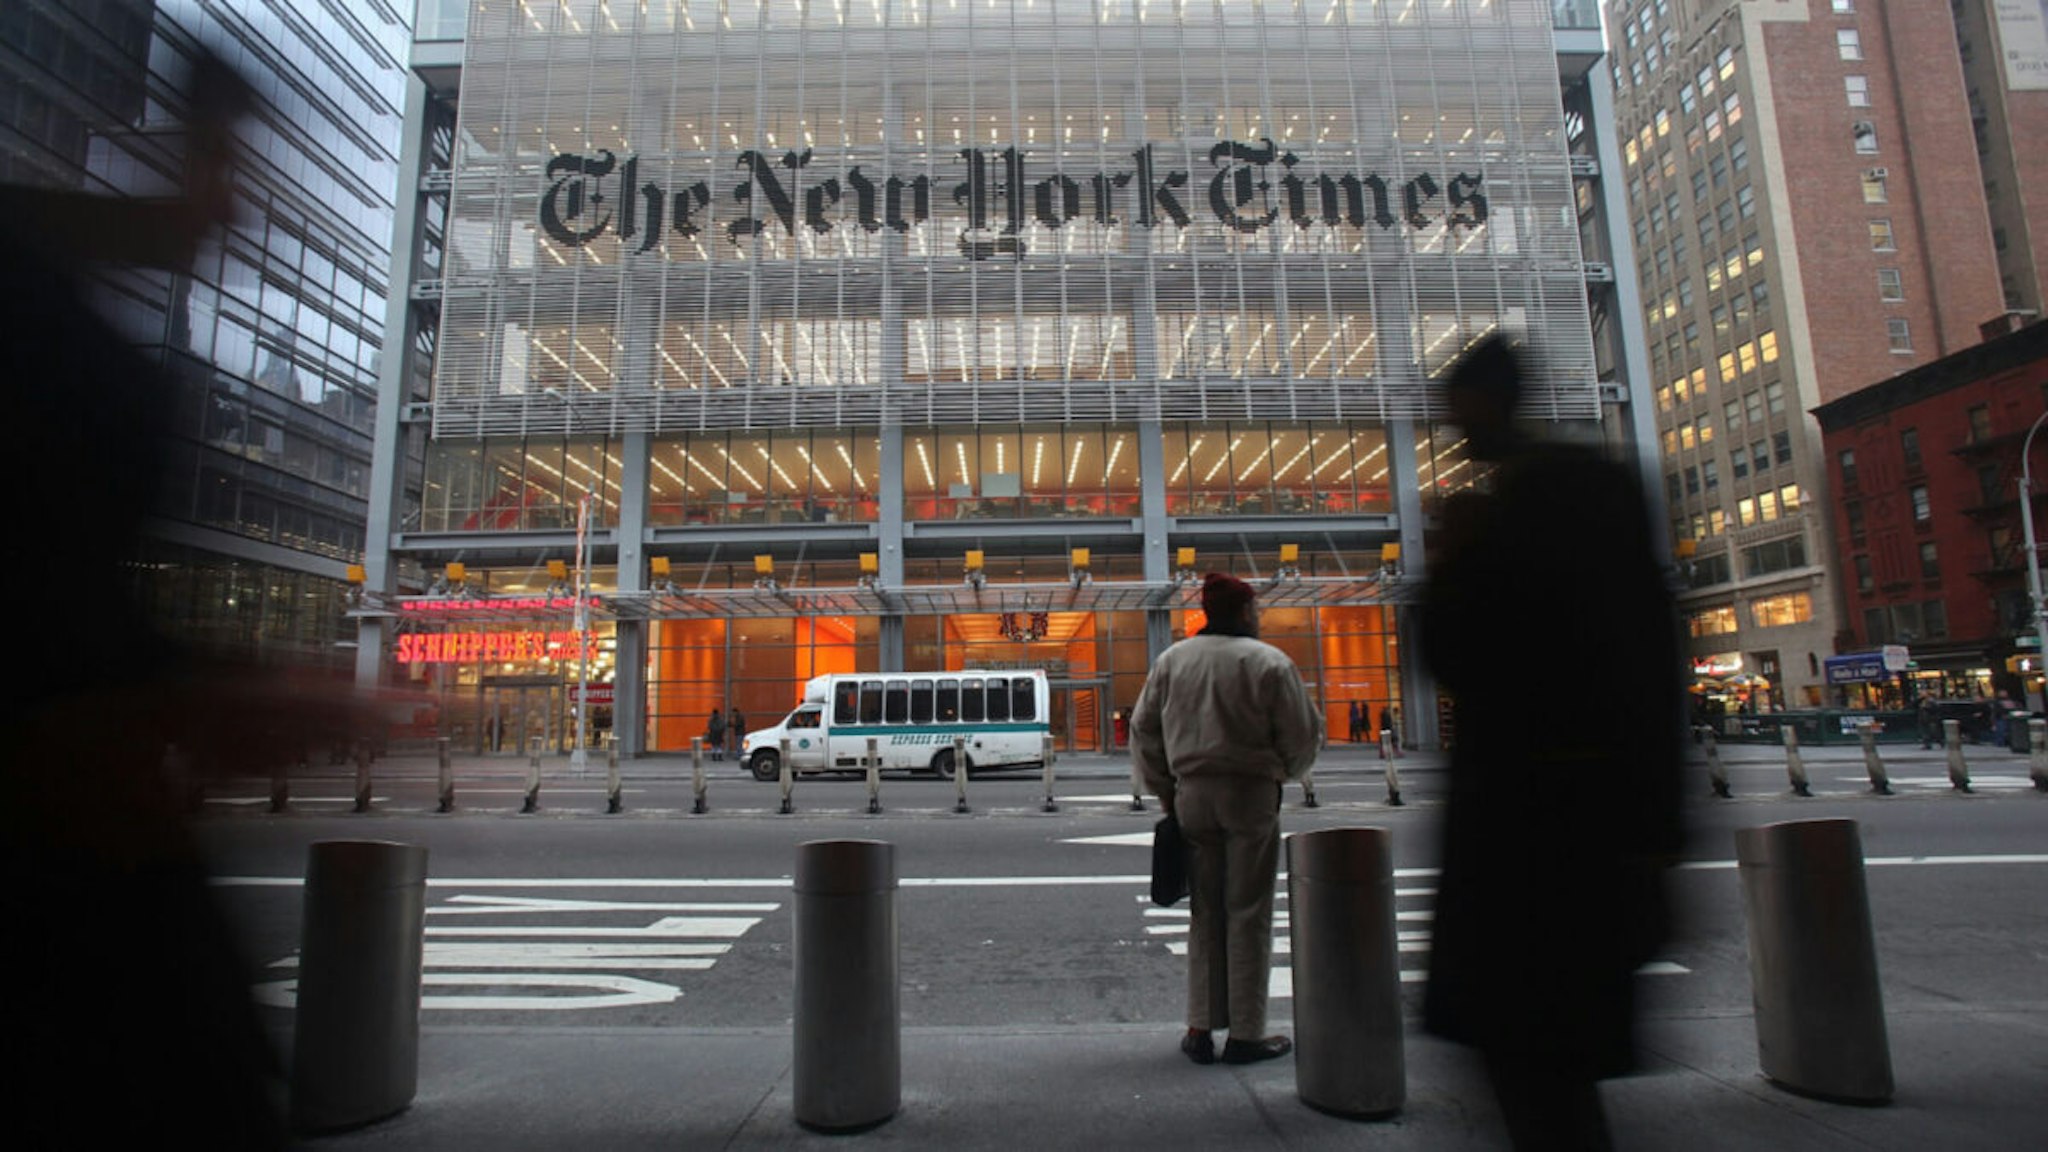 The New York Times' masthead is displayed in front of the midtown headquarters on December 7, 2009 in New York City.